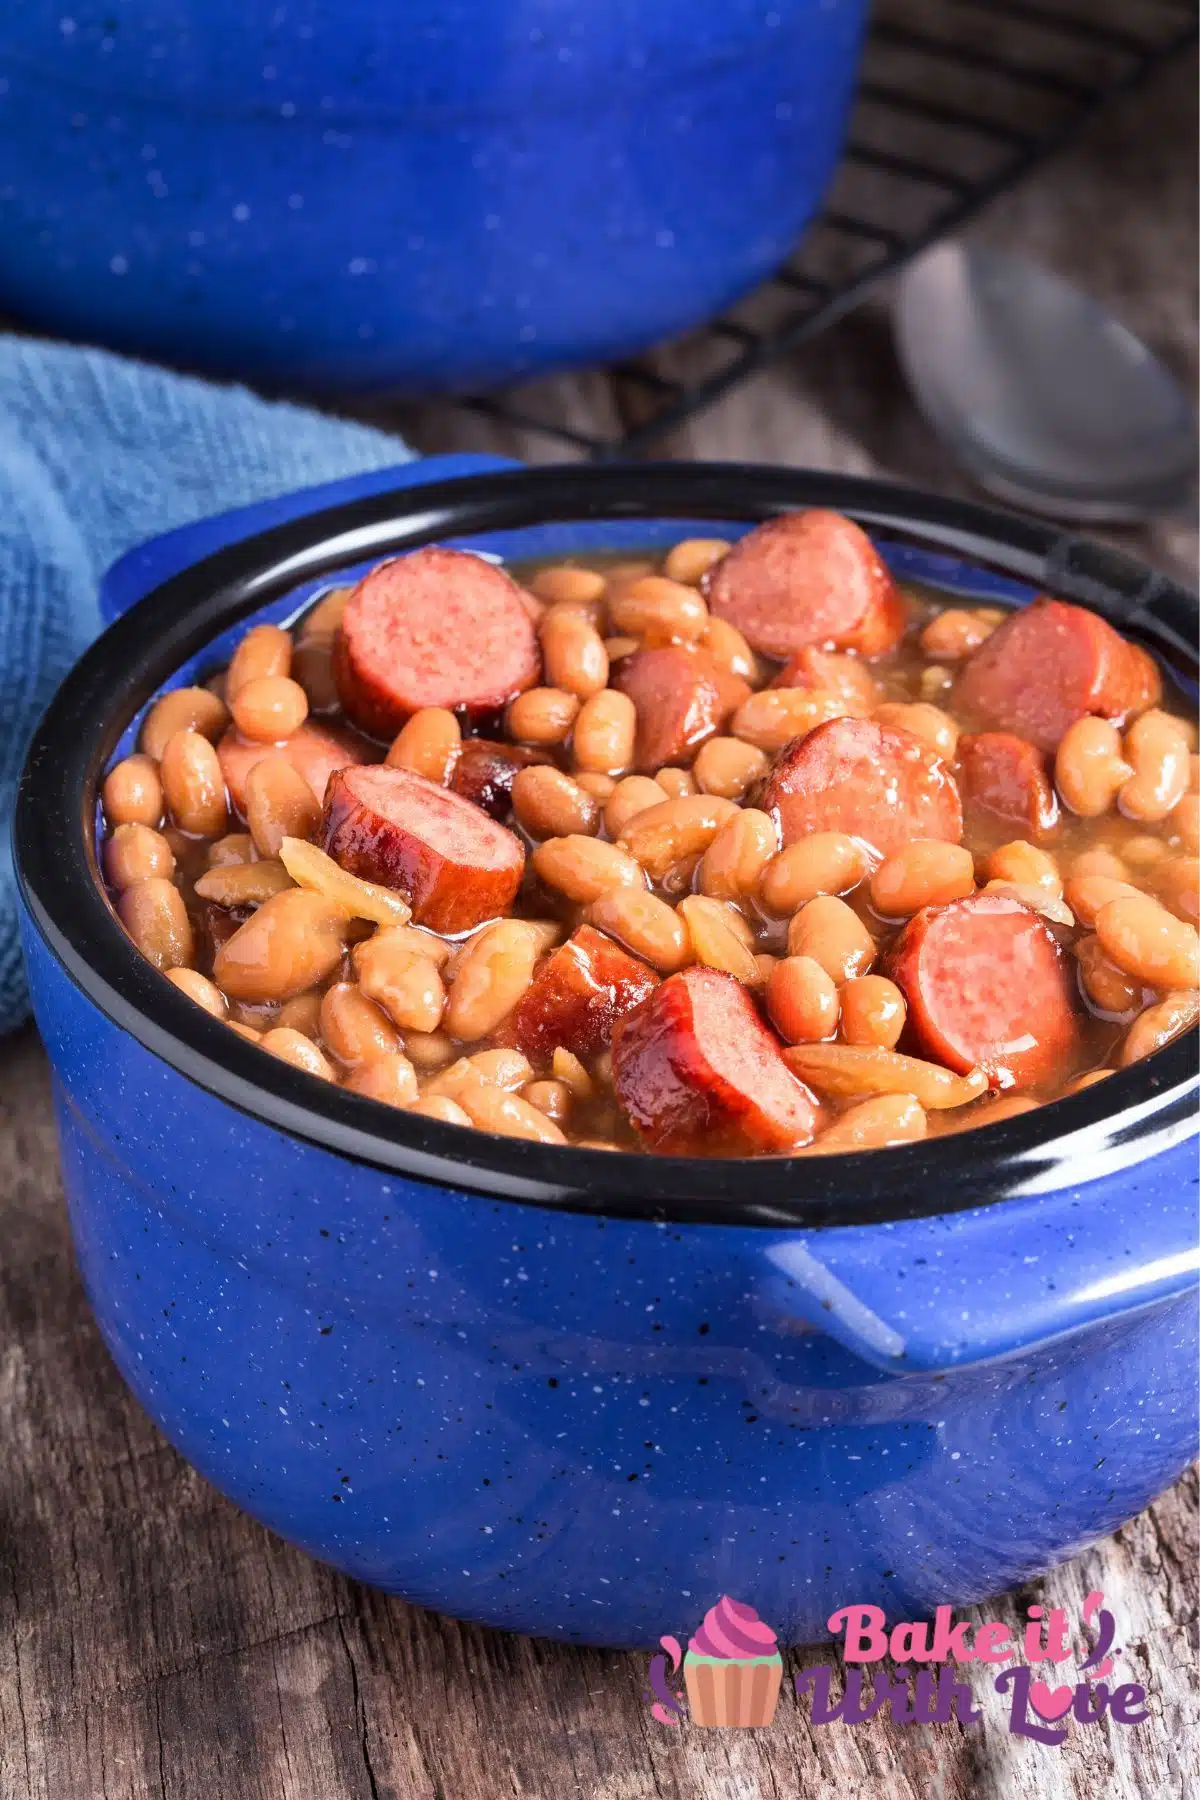 Tall image of a pot of franks and beans.